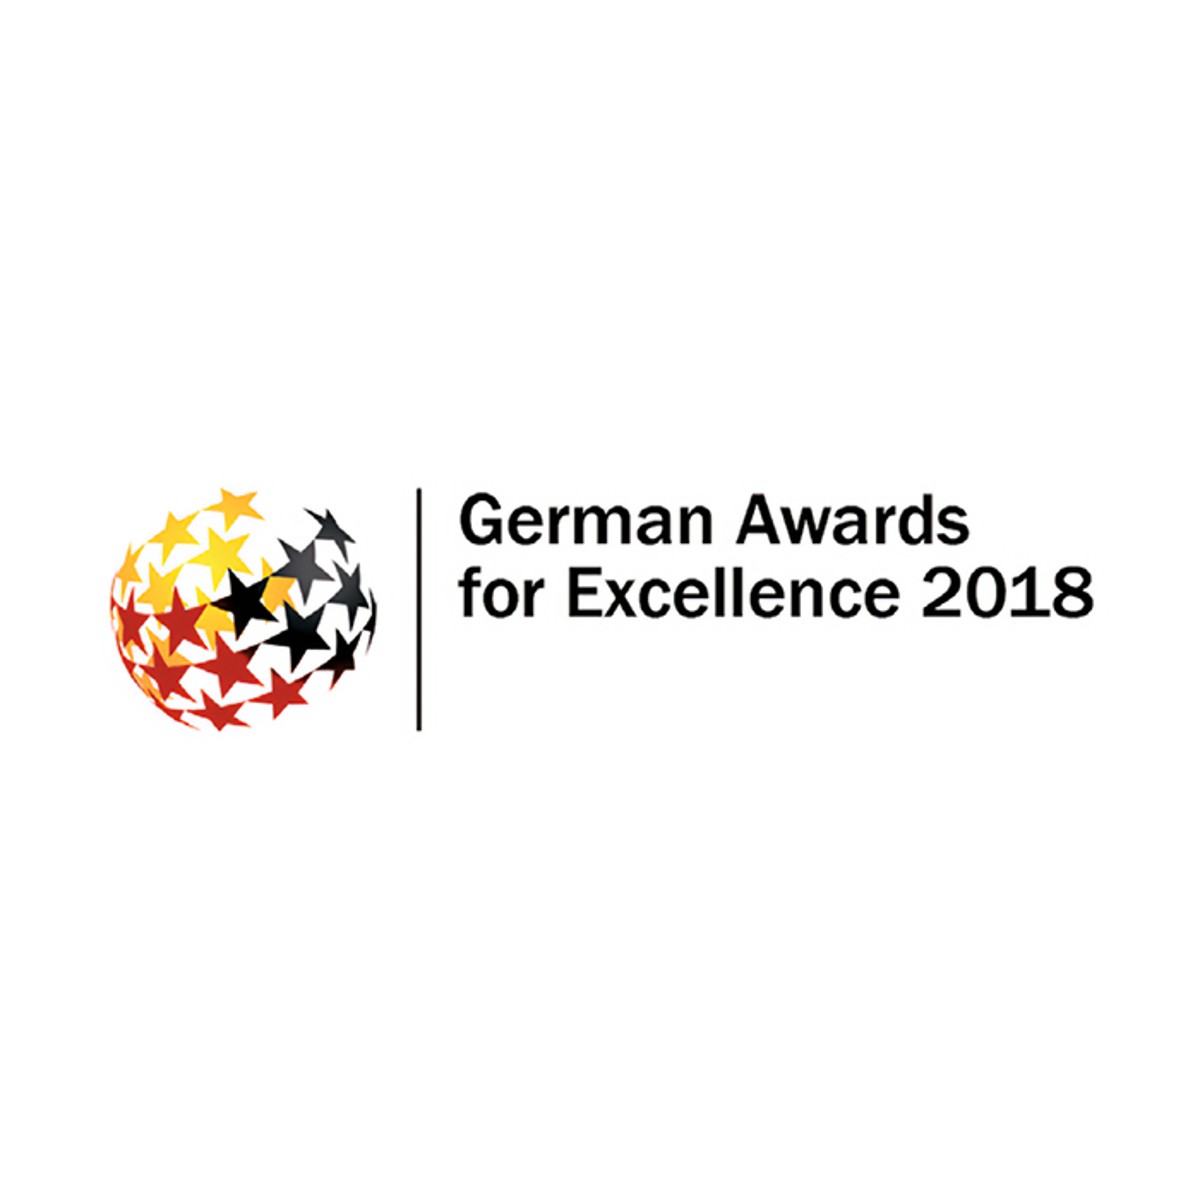 German Awards for Excellence